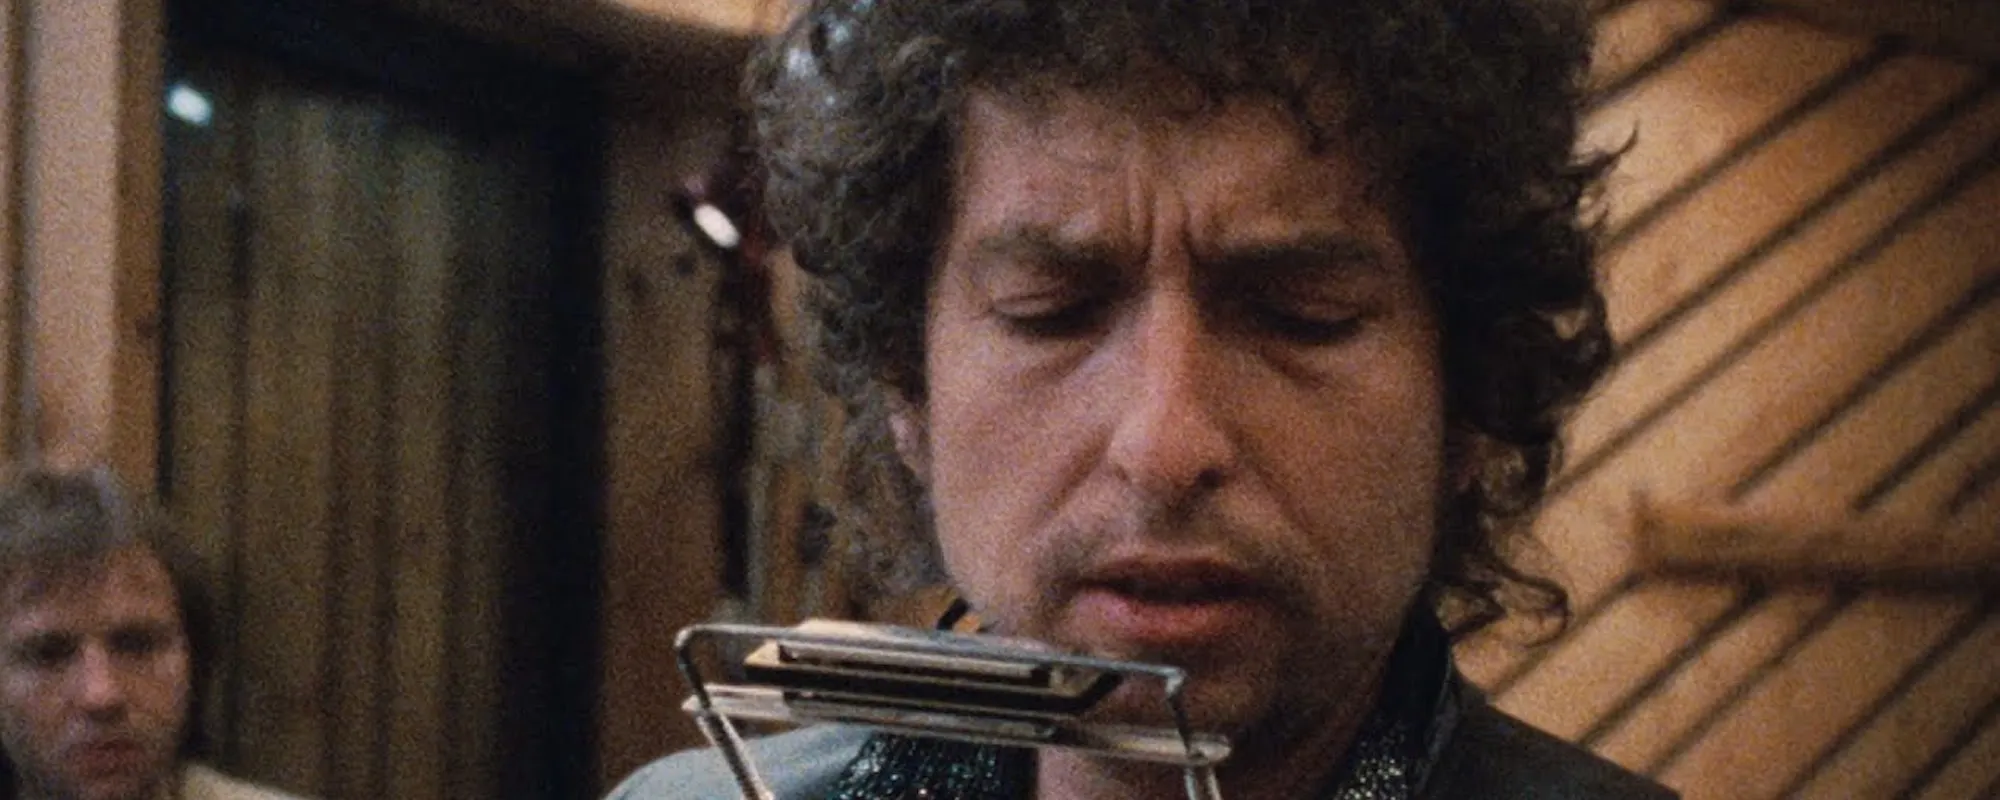 Bob Dylan “Licence to Kill” Video Gives Rare Glimpse Into ‘Infidels’ Sessions